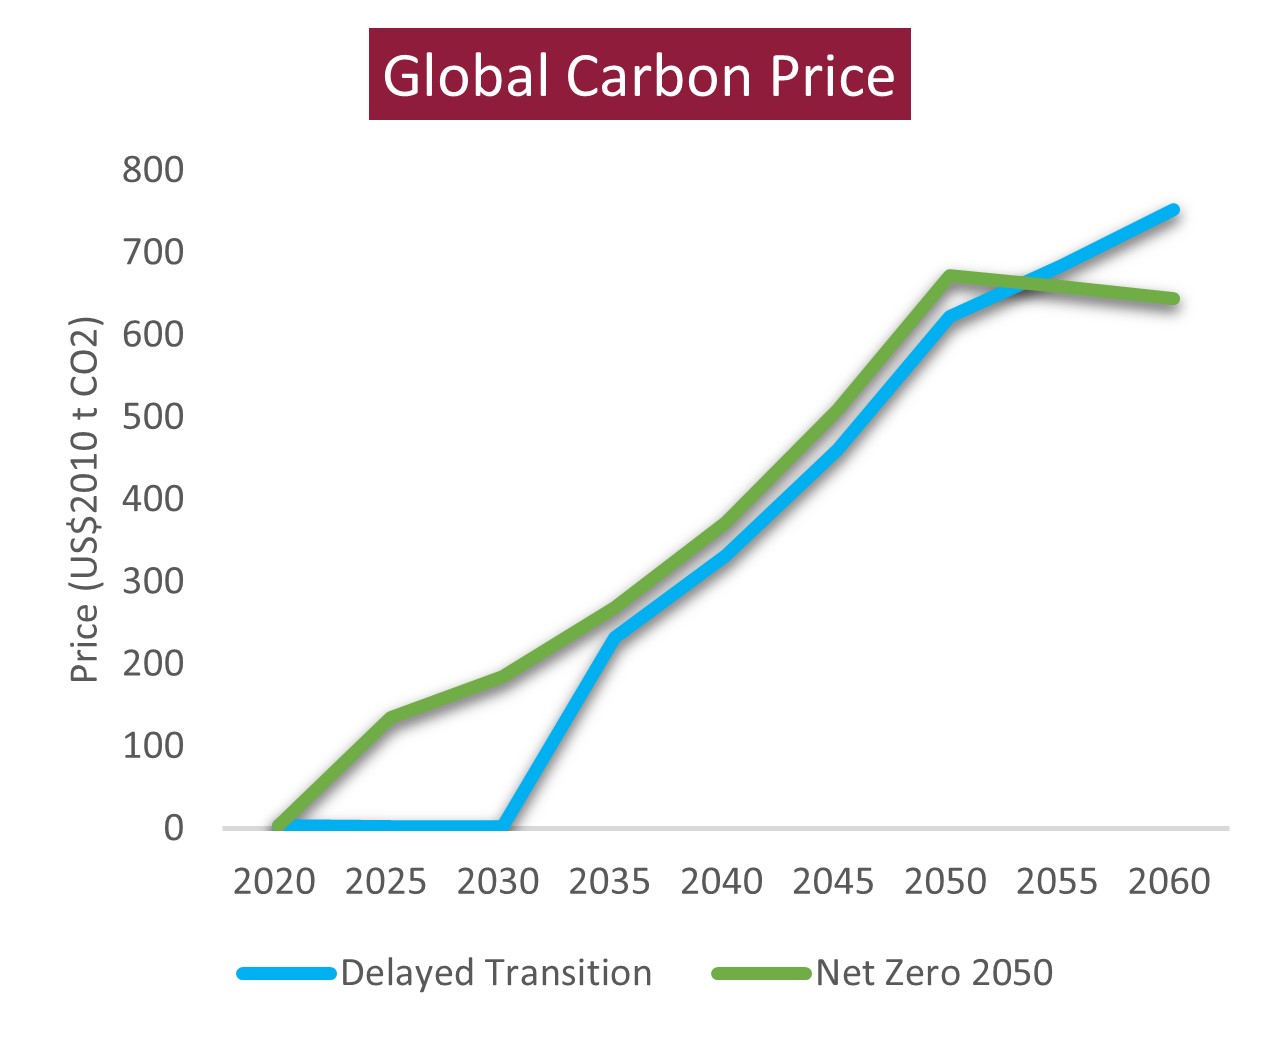 Global carbon price based on Delayed Transition vs. Net Zero 2050